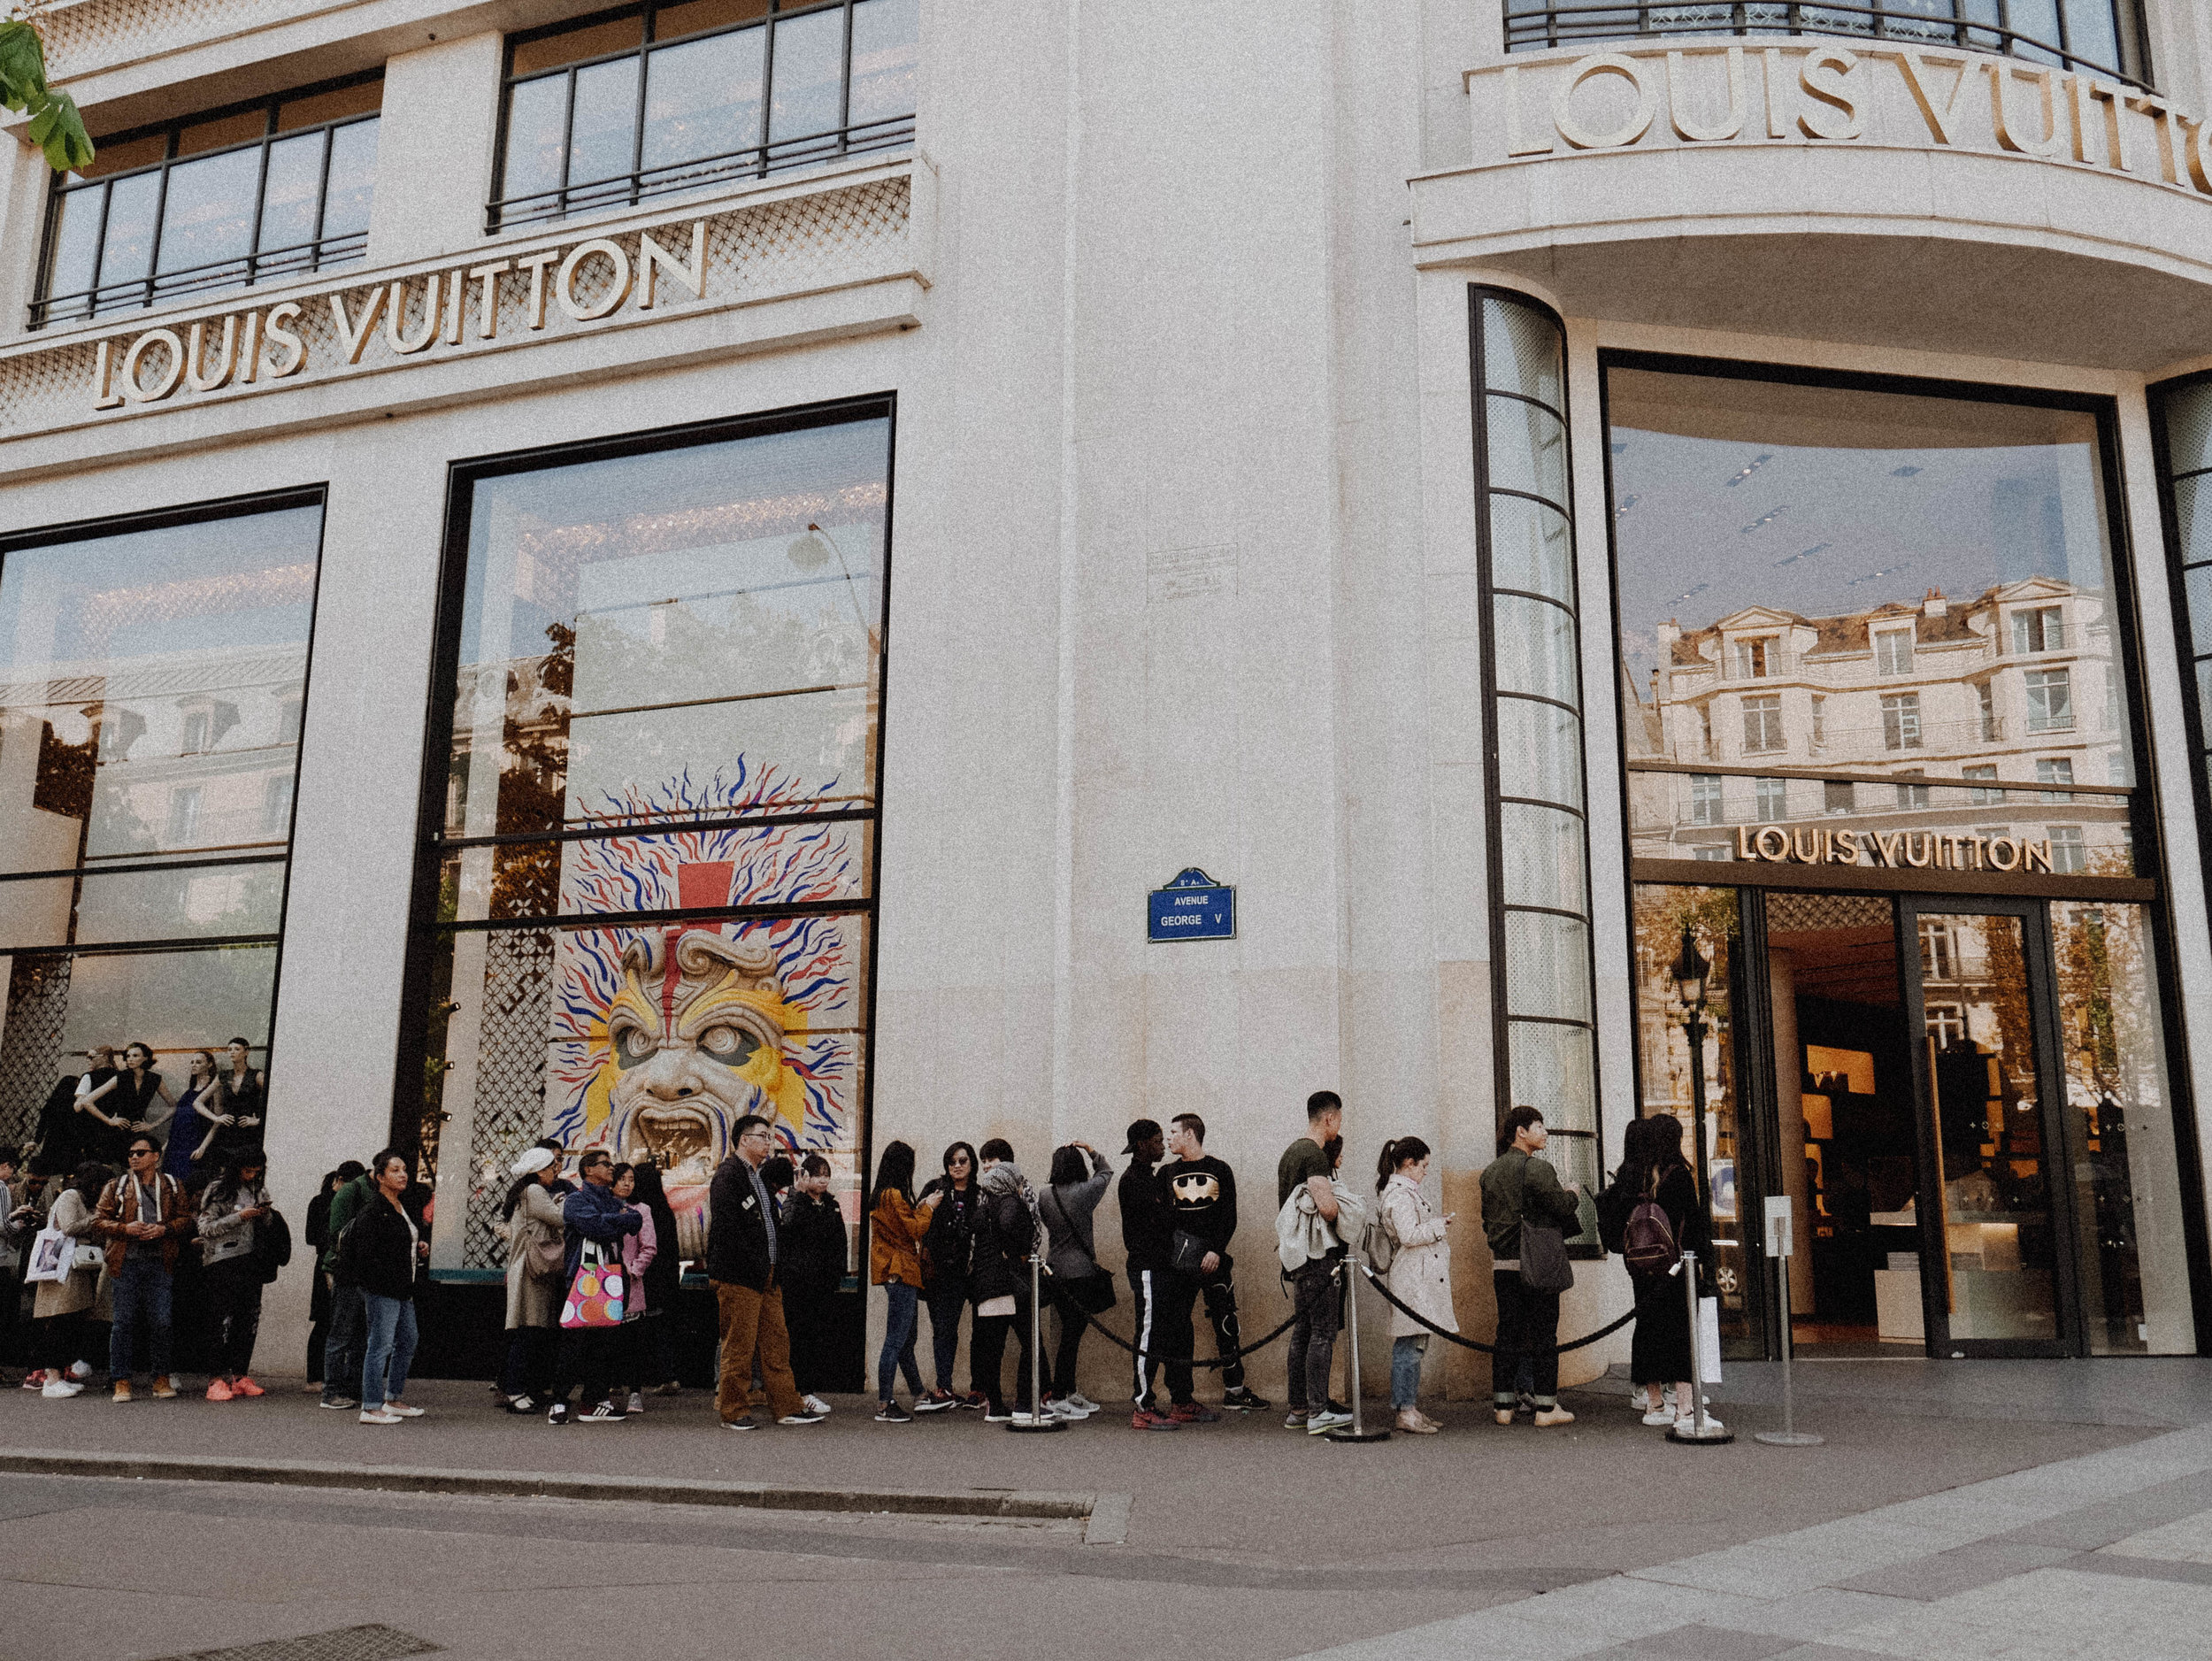 LVMH Reports Growth For Q1 2019, Including the Watches & Jewelry Division -  Monochrome Watches